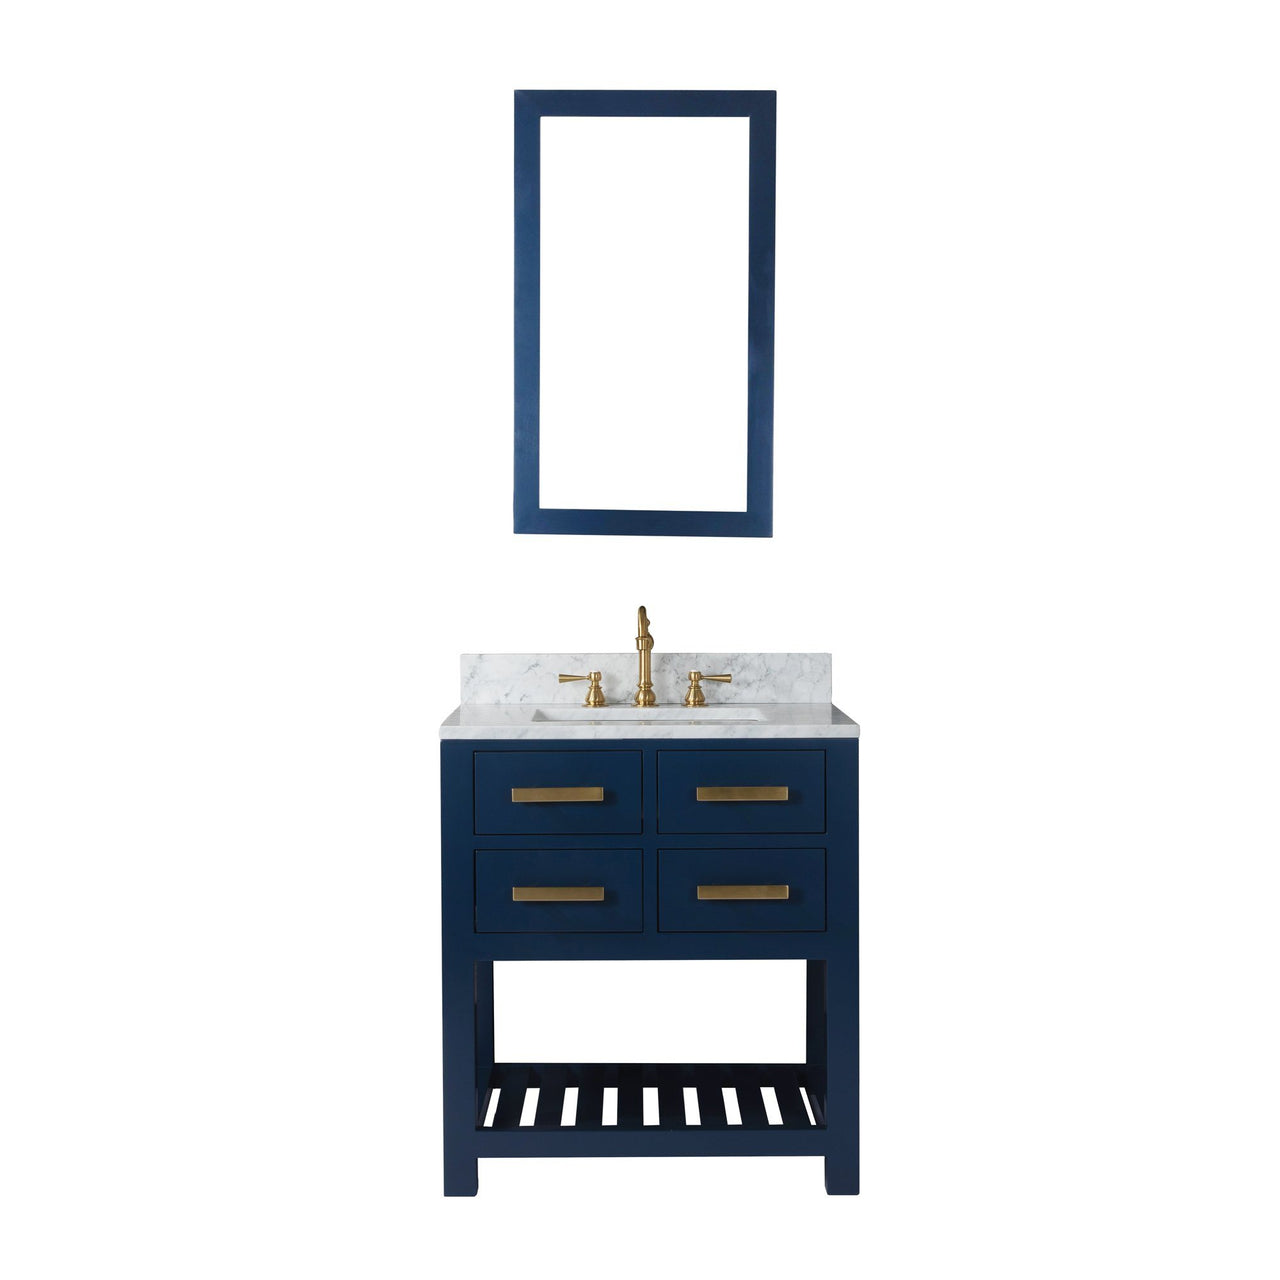 30 Inch Monarch Blue Single Sink Bathroom Vanity From The Madalyn Collection Vanity Water Creation 